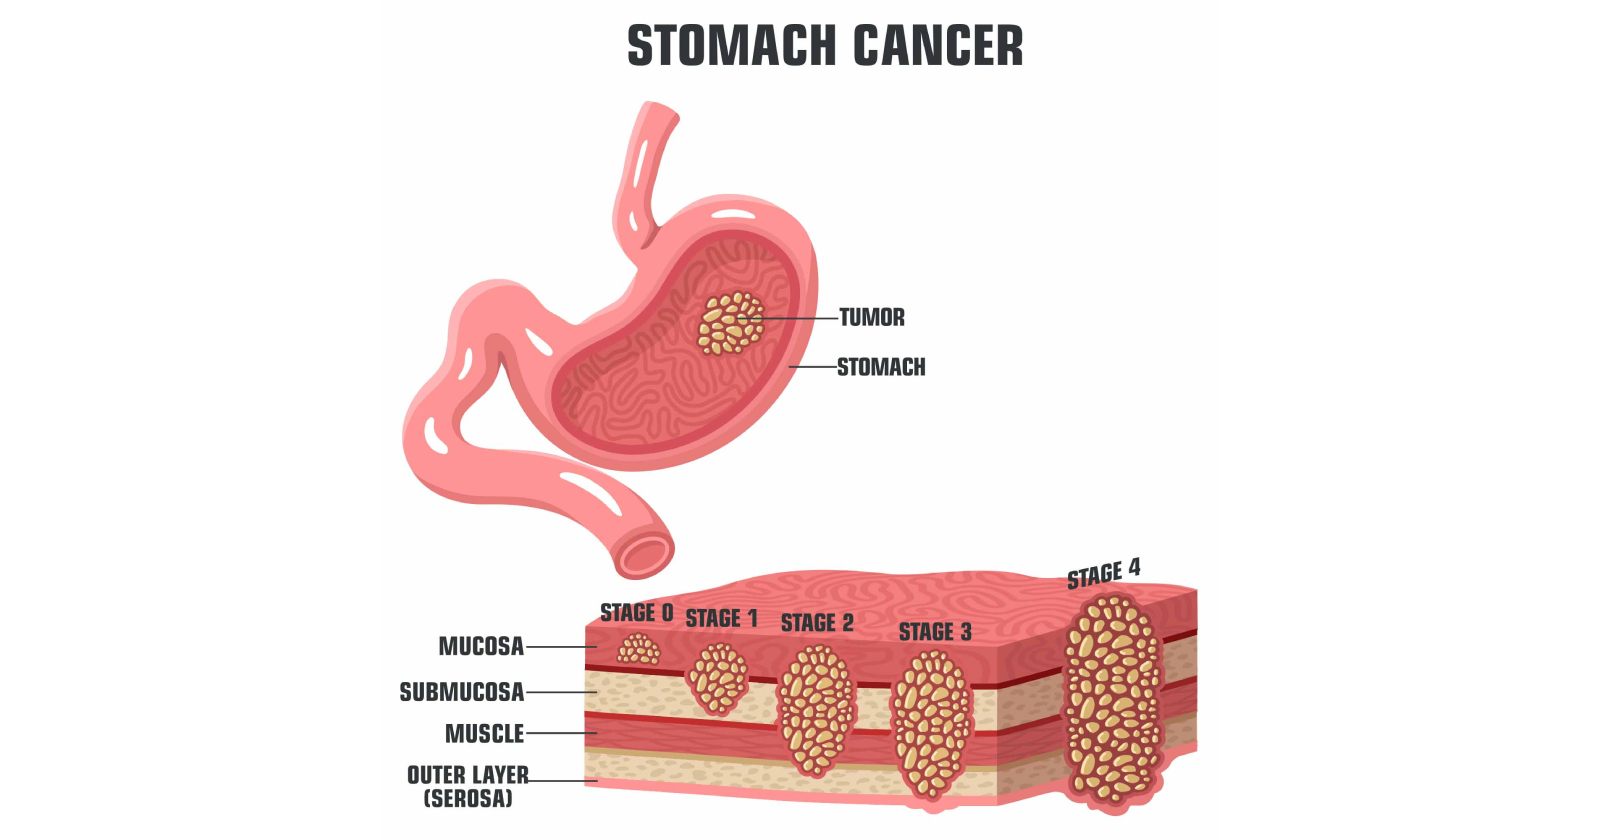 Overview of Stomach Cancer: Causes, symptoms, and treatment